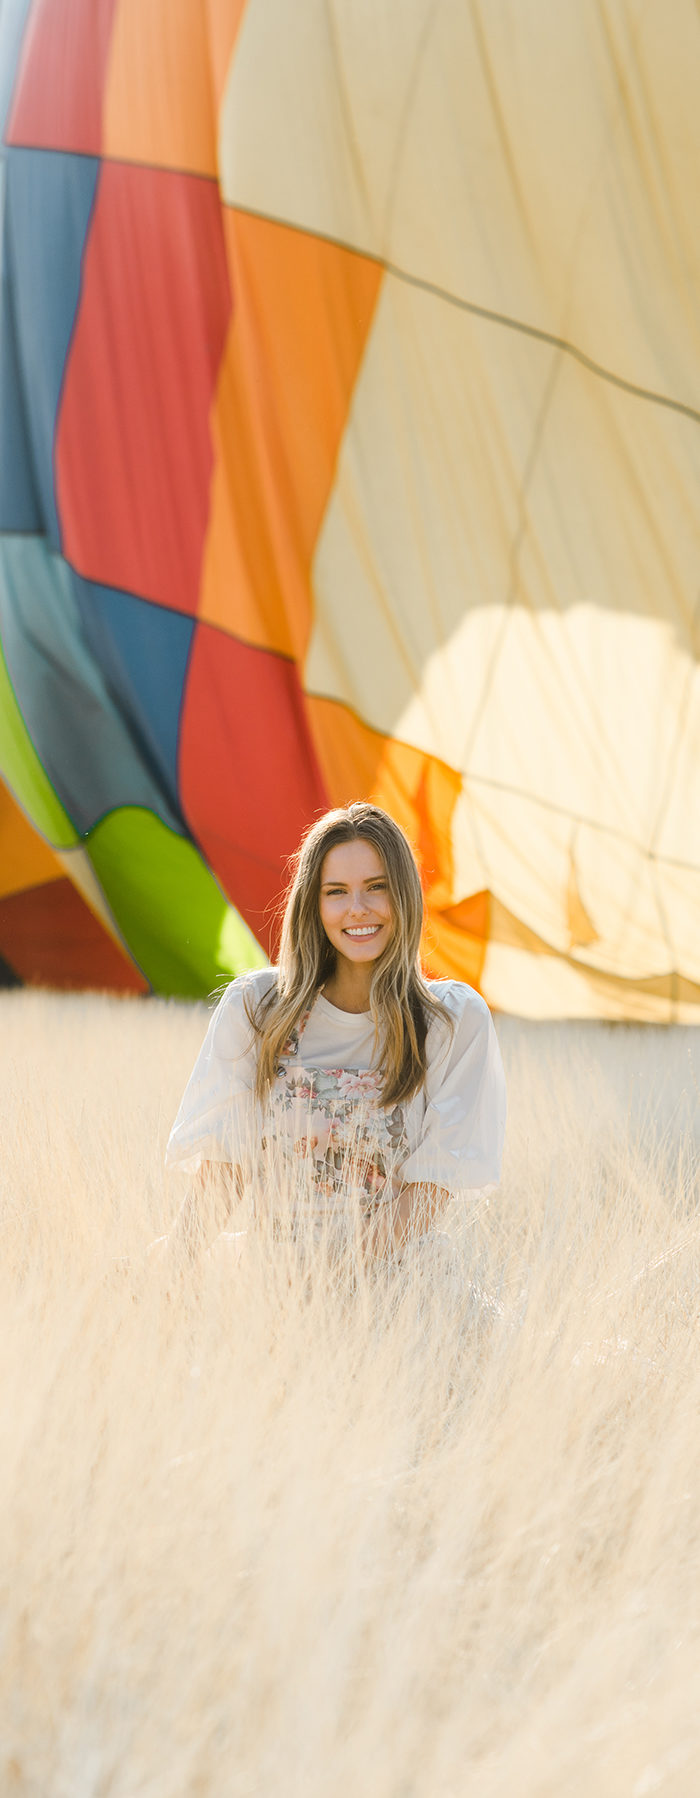 Alyssa Campanella of The A List blog visits Calistoga Balloons with Visit Napa Valley wearing Zimmerman jumpsuit and Gentle Monster Ranny sunglasses